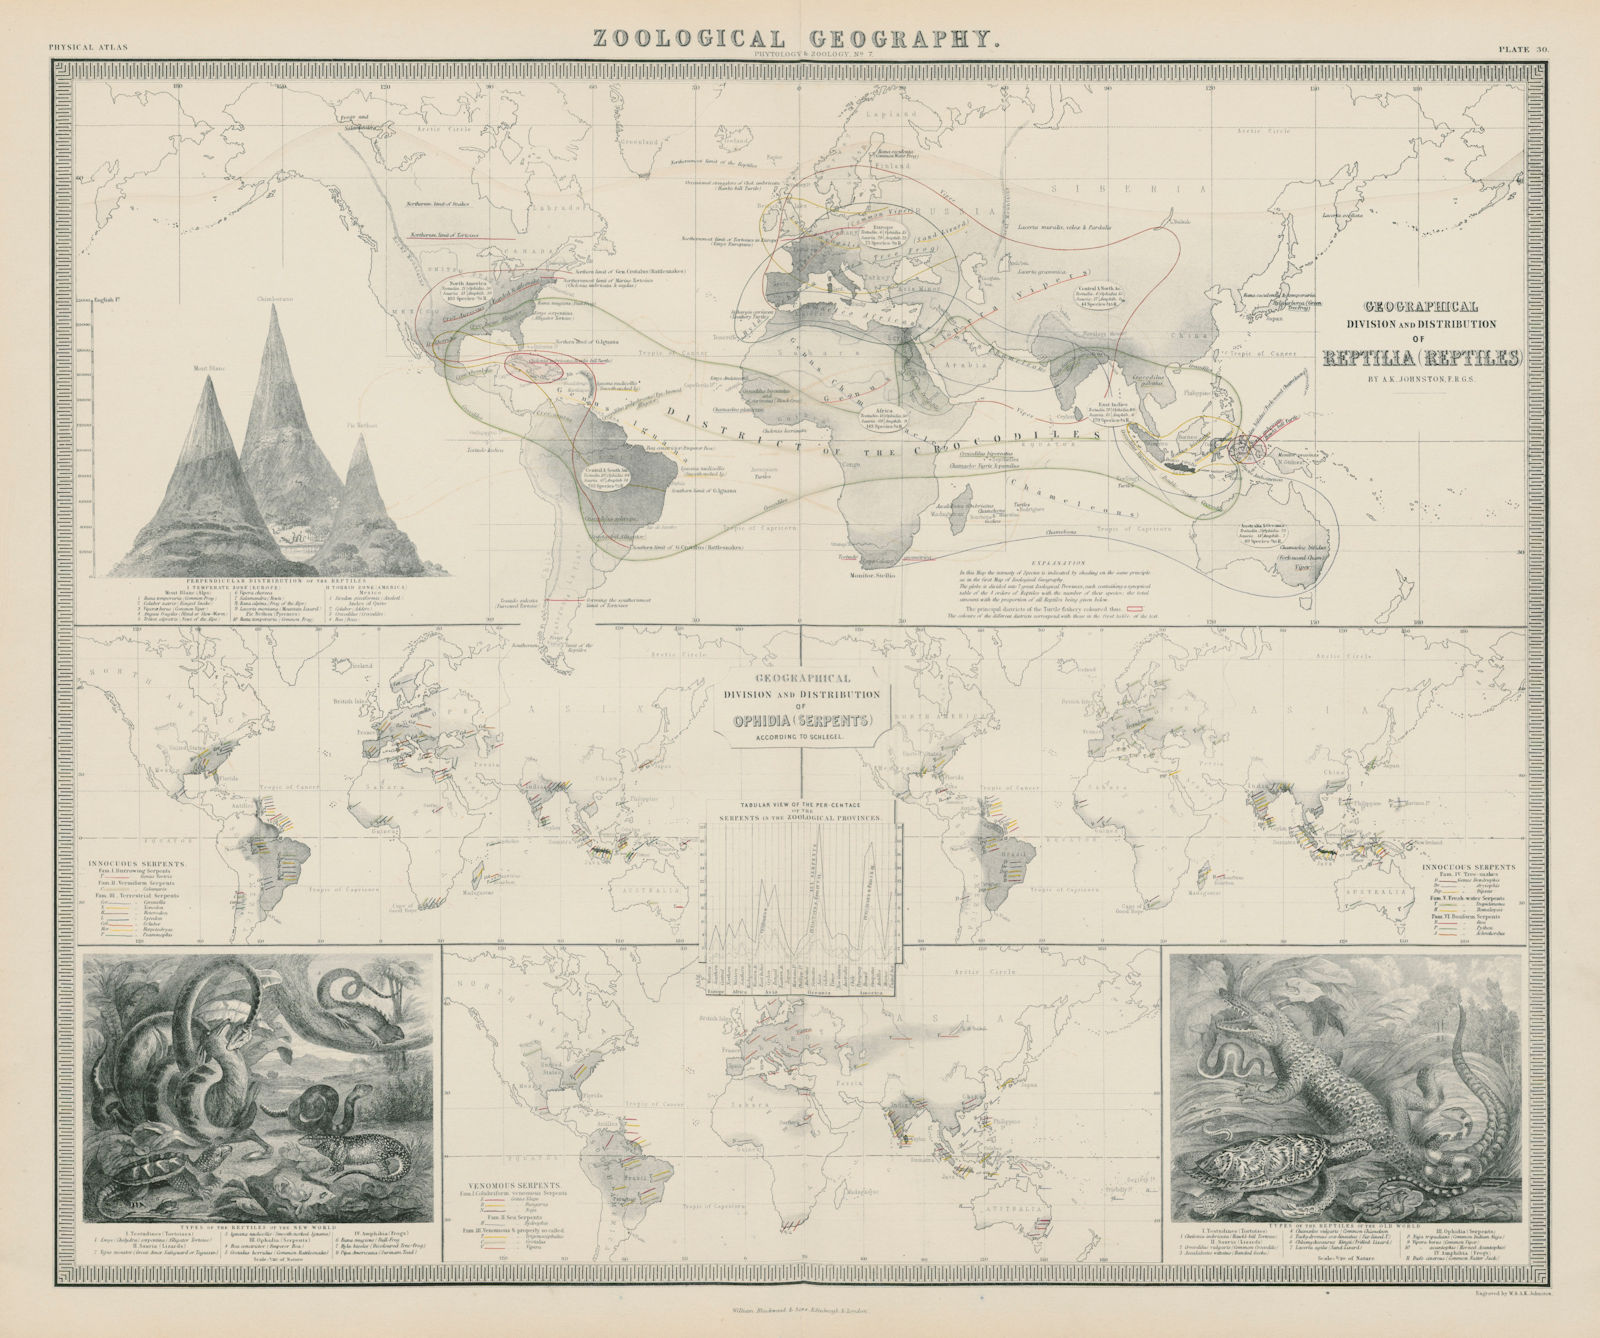 Zoological Geography. Reptile & Ophidia (Serpents/snakes) distribution 1856 map